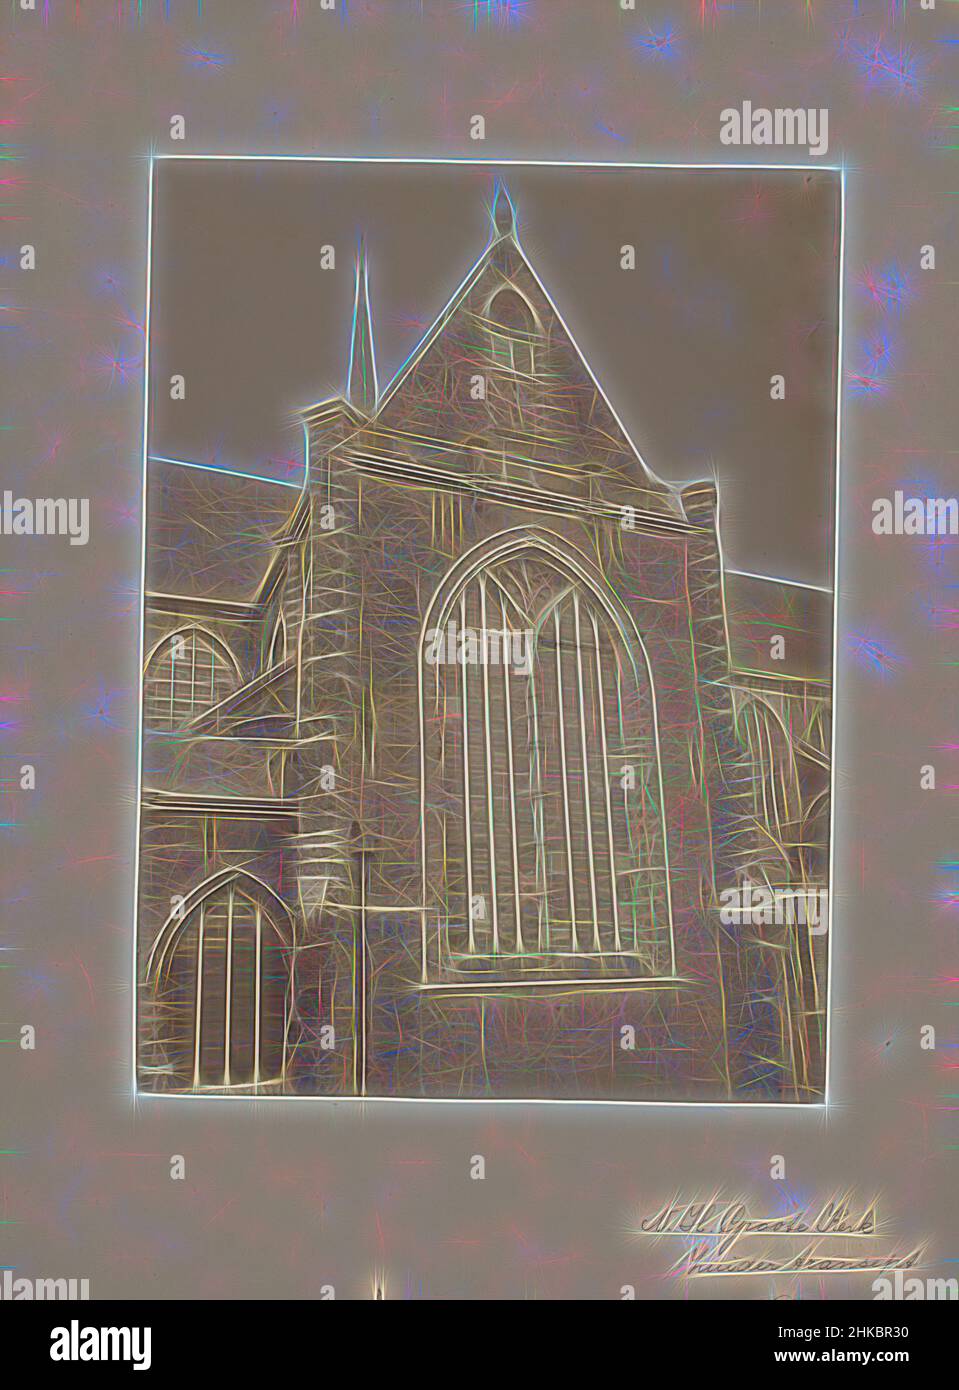 Inspired by South transept of the Great or Our Lady's Church in Dordrecht, A.J.M. Mulder, Voorstraat, c. 1880 - c. 1910, albumen print, height 230 mm × width 170 mm, Reimagined by Artotop. Classic art reinvented with a modern twist. Design of warm cheerful glowing of brightness and light ray radiance. Photography inspired by surrealism and futurism, embracing dynamic energy of modern technology, movement, speed and revolutionize culture Stock Photo